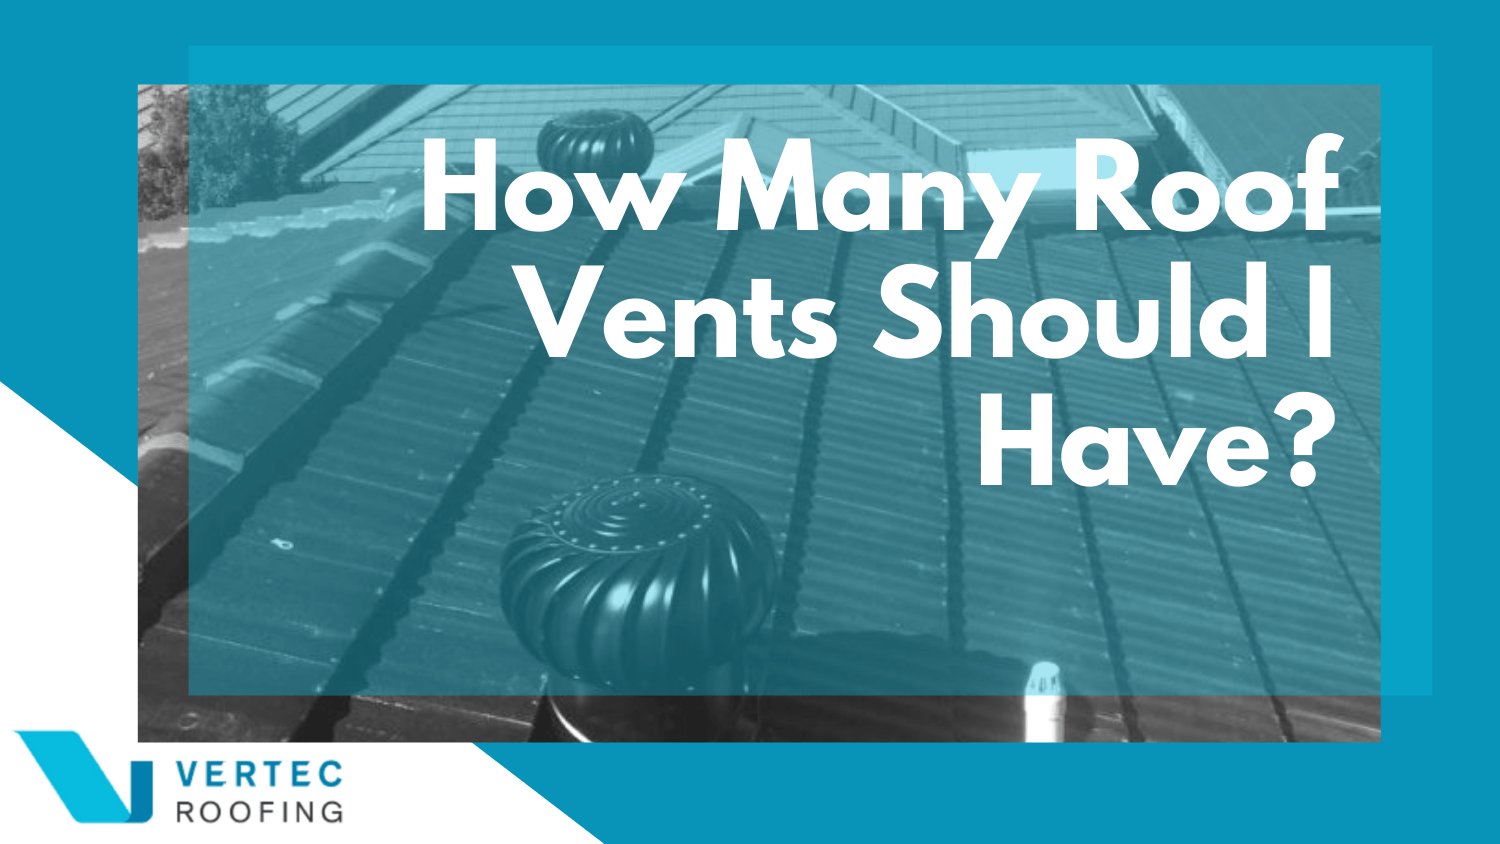 How Many Roof Vents Should I Have? A Guide to Roof Ventilation